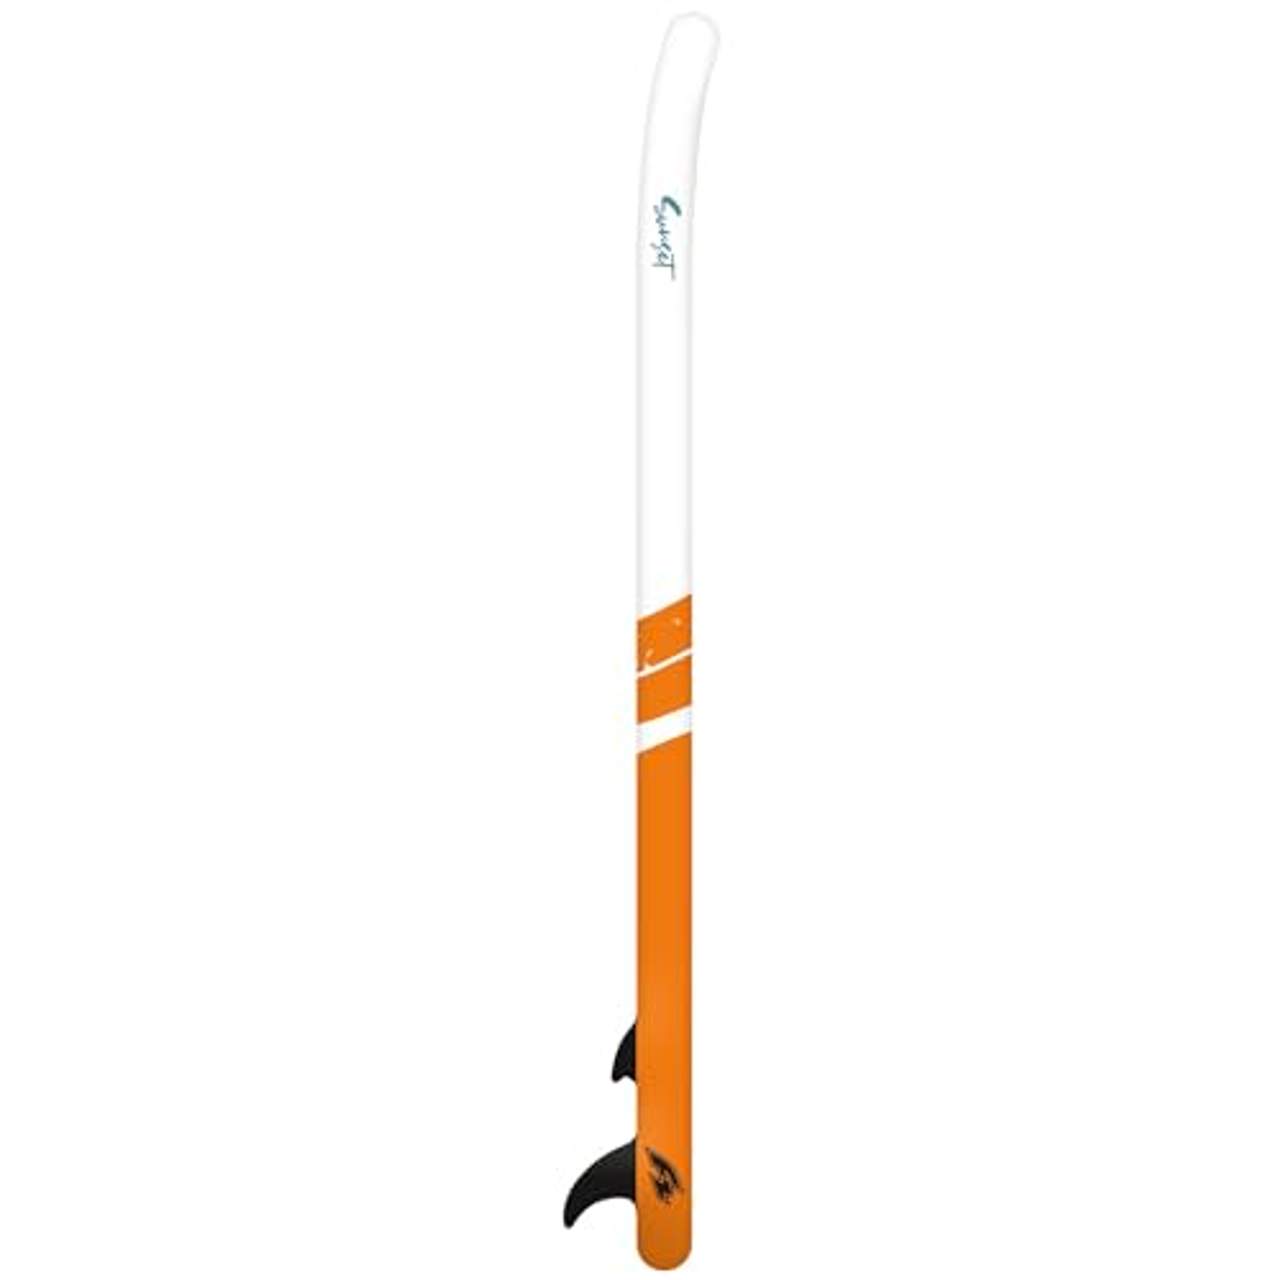 Campsup SUP F2 Sunset 11'8" Turquoise Aufblasbares Stand Up Paddle Board